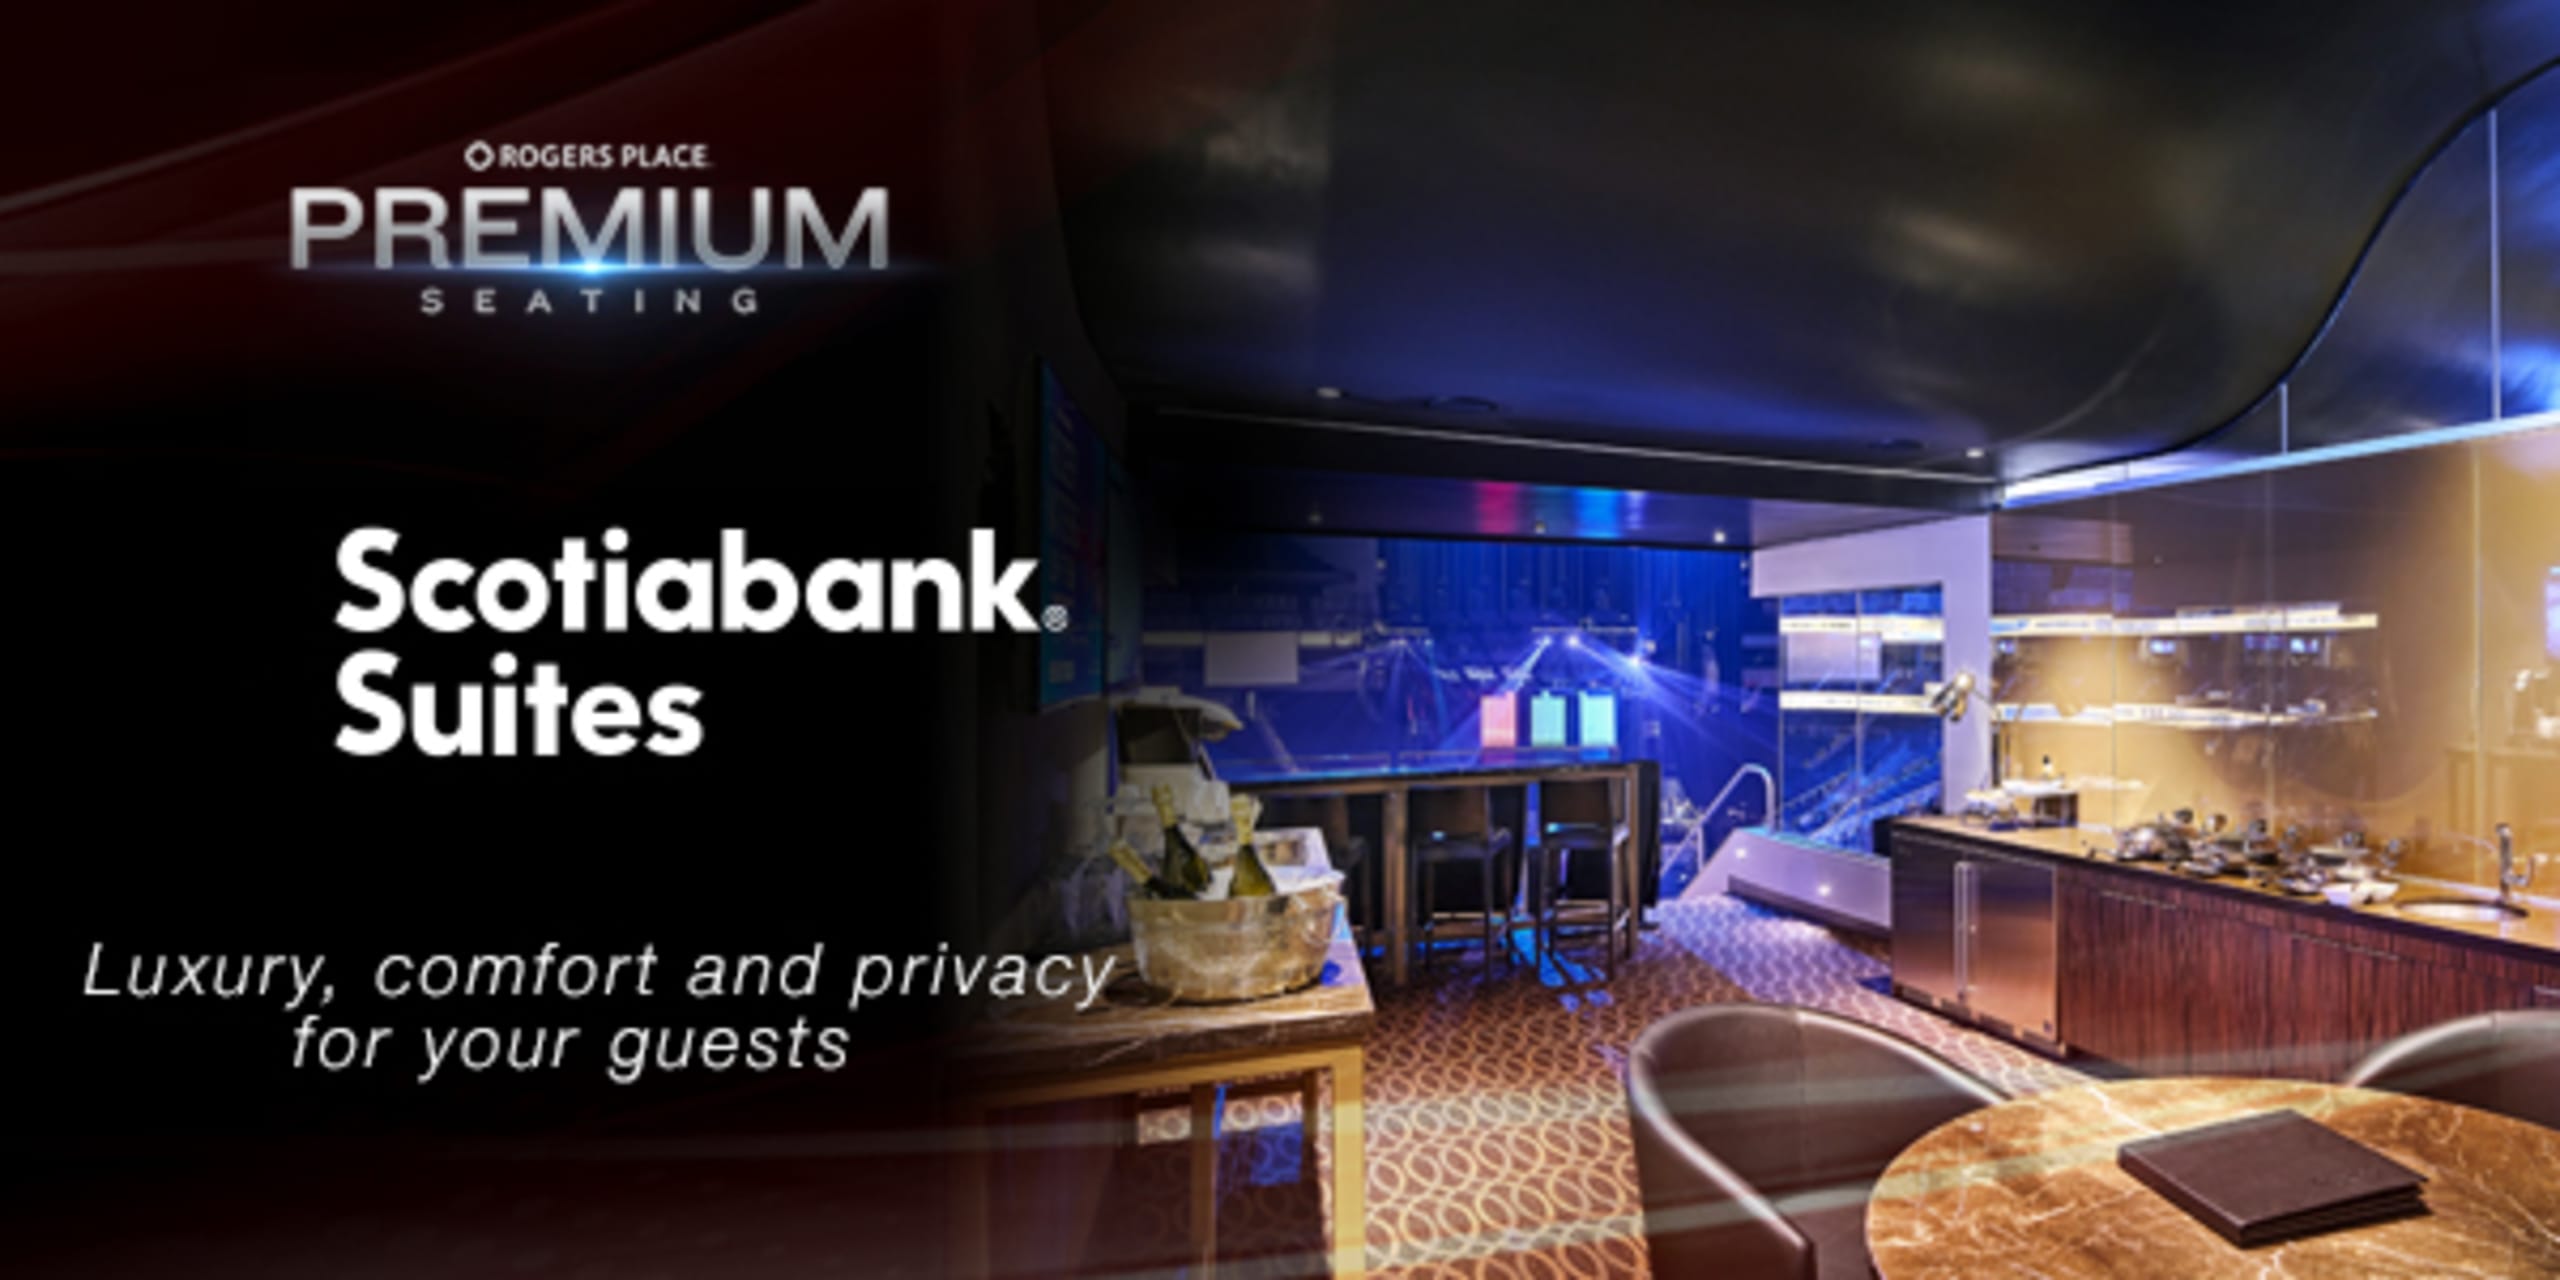 Scotiabank Suites - Luxury, comfort, and privacy for your guests